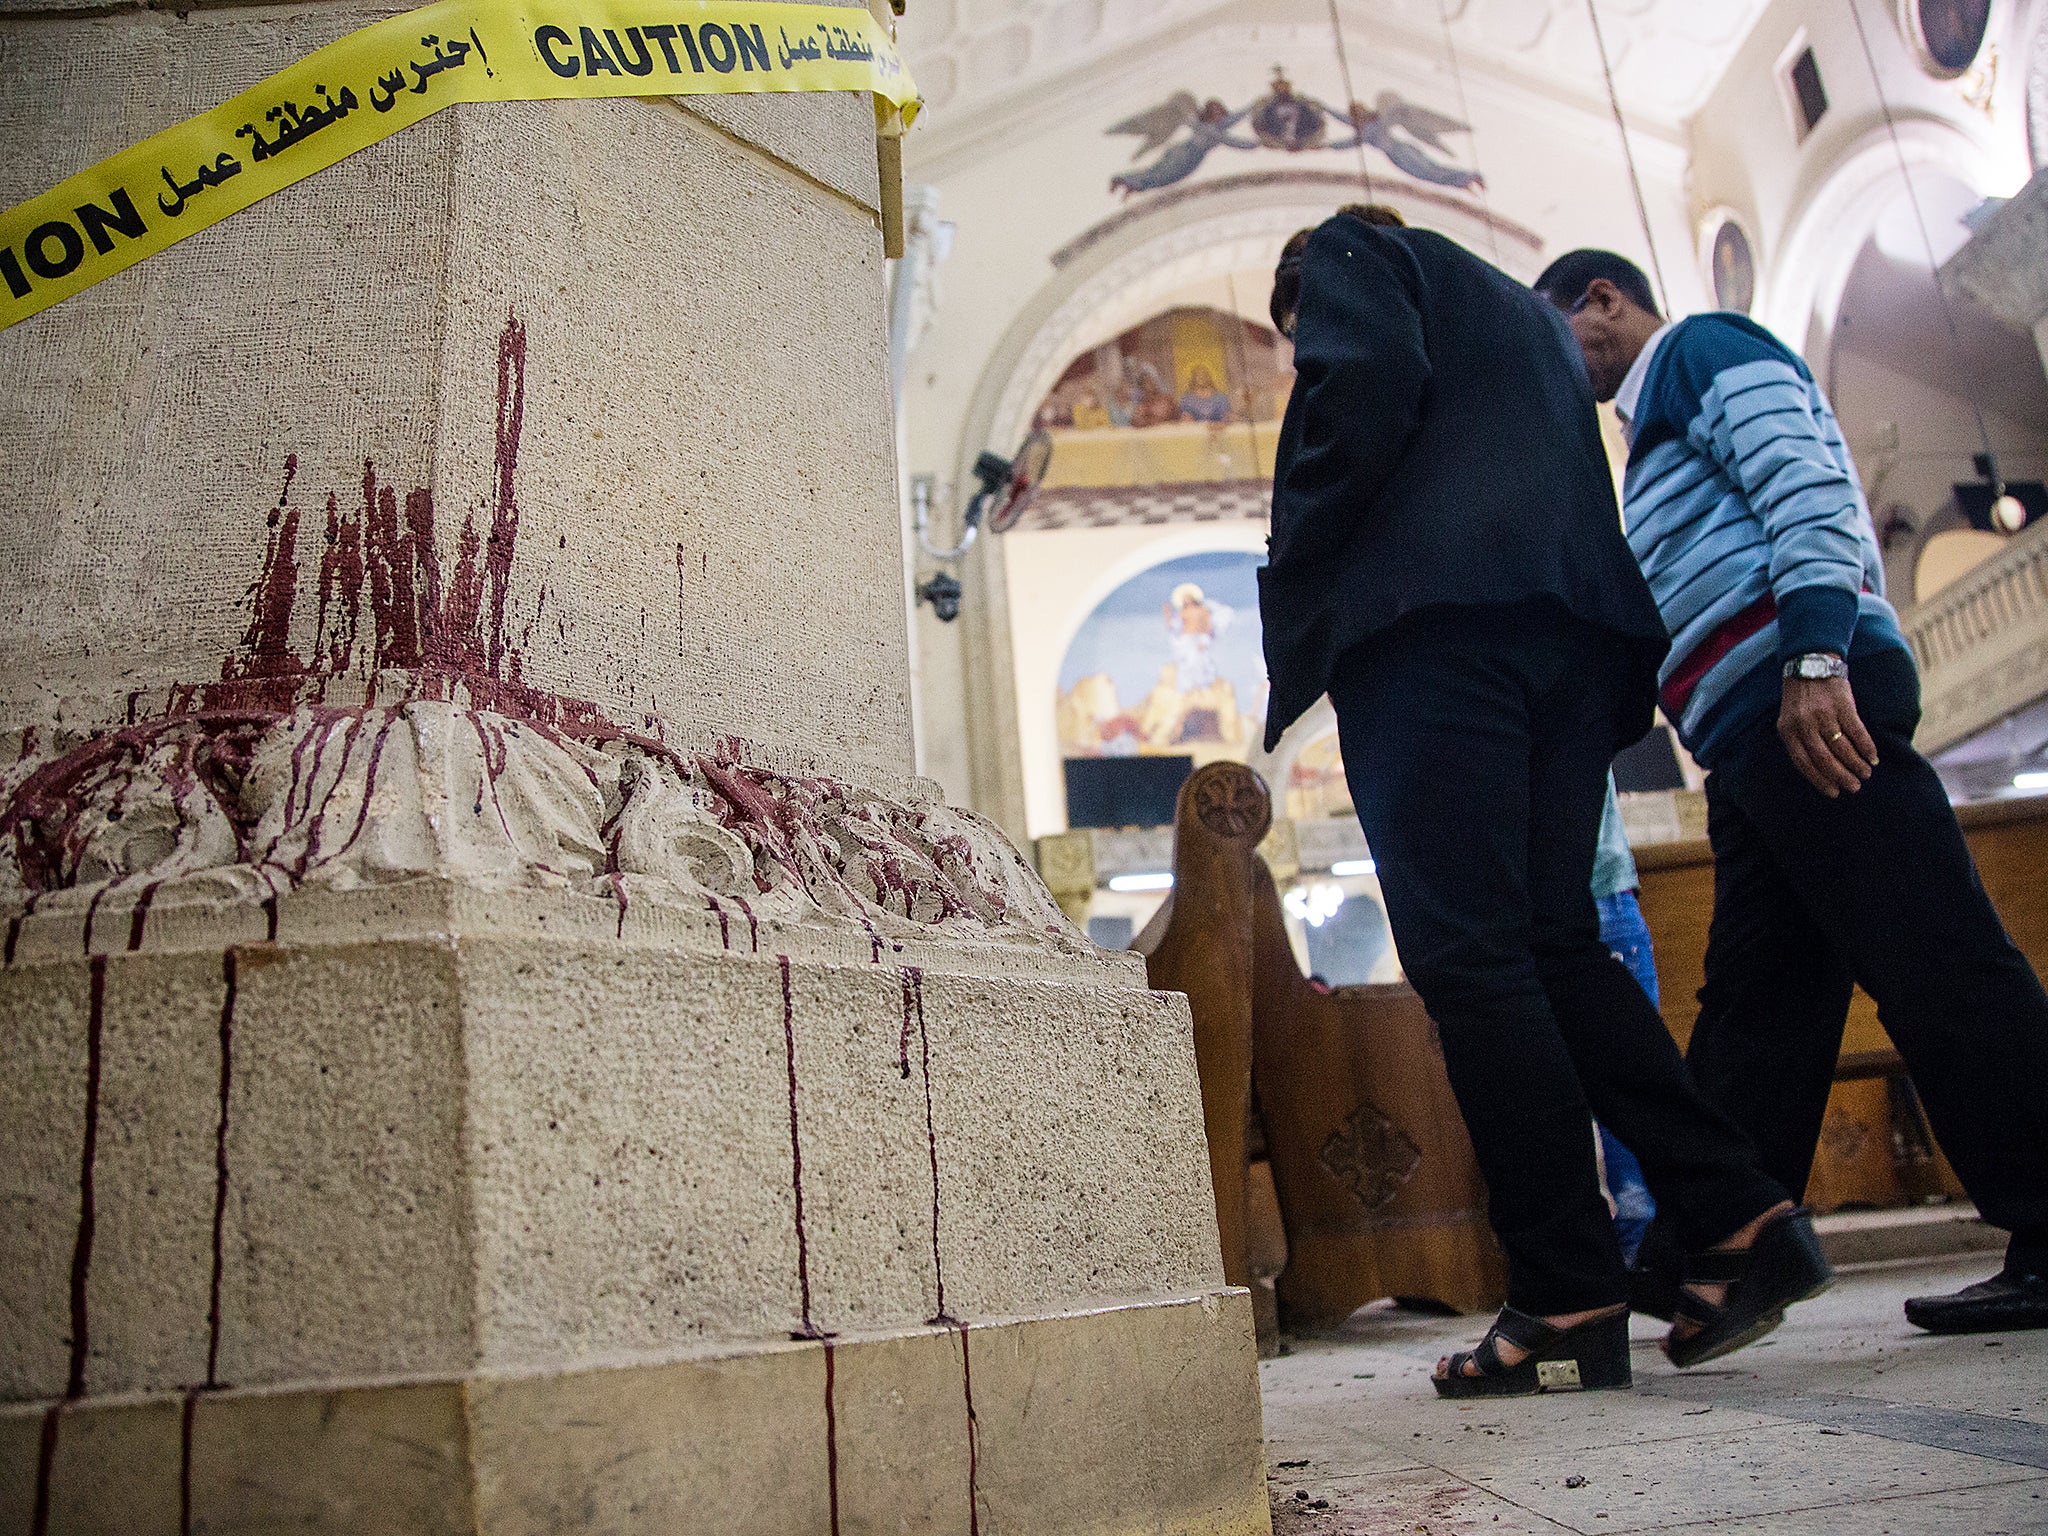 &#13;
Suicide bombing at St. George Church, in the Nile Delta town of Tanta, Egypt (Getty)&#13;